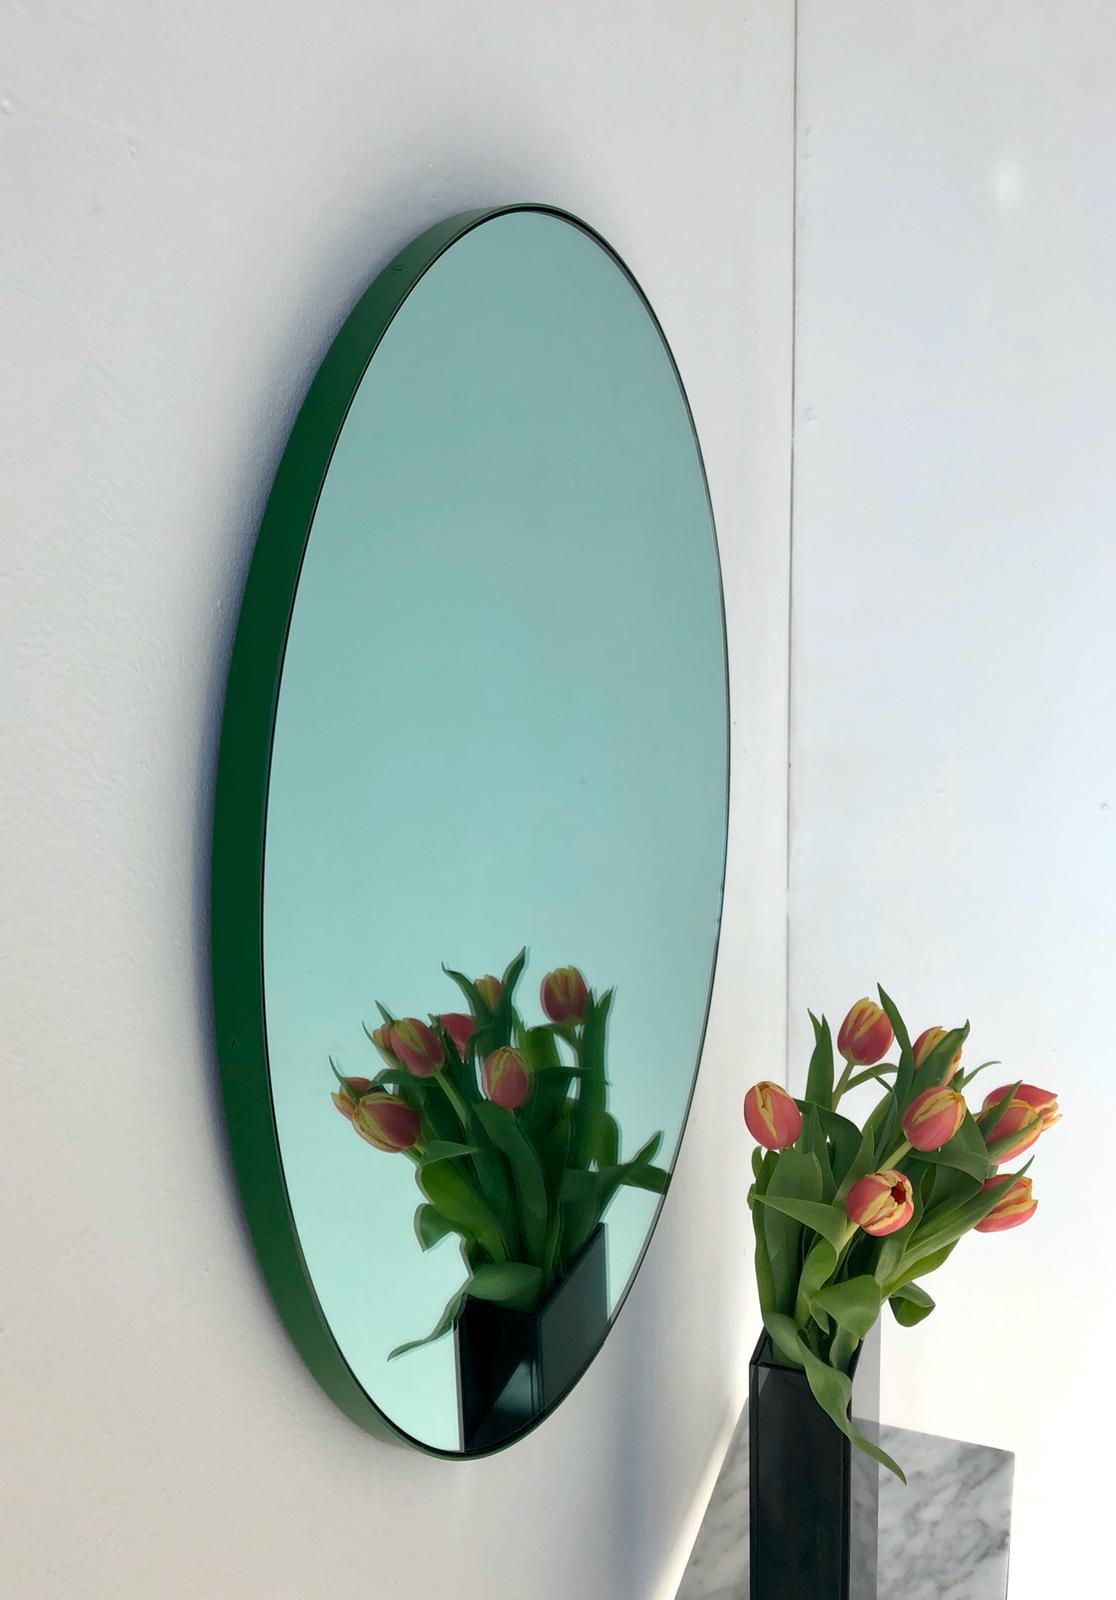 Orbis Green Tinted Handcrafted Round Mirror with Green Frame, Regular 2